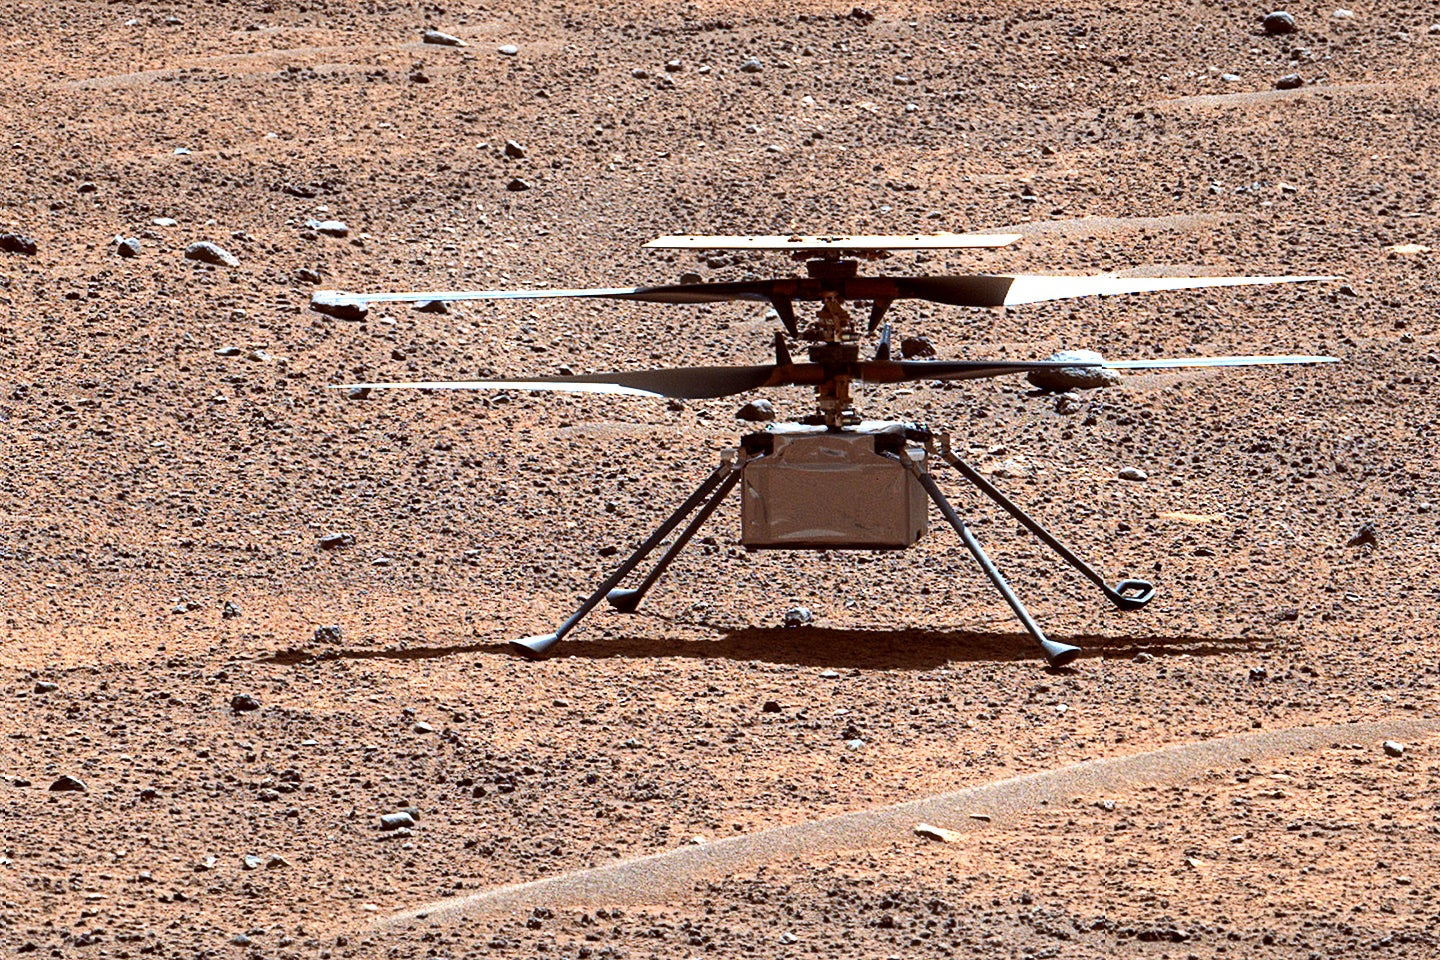 NASA's Mars Helicopter Ingenuity Ends Mission on the Red Planet after 3 Years